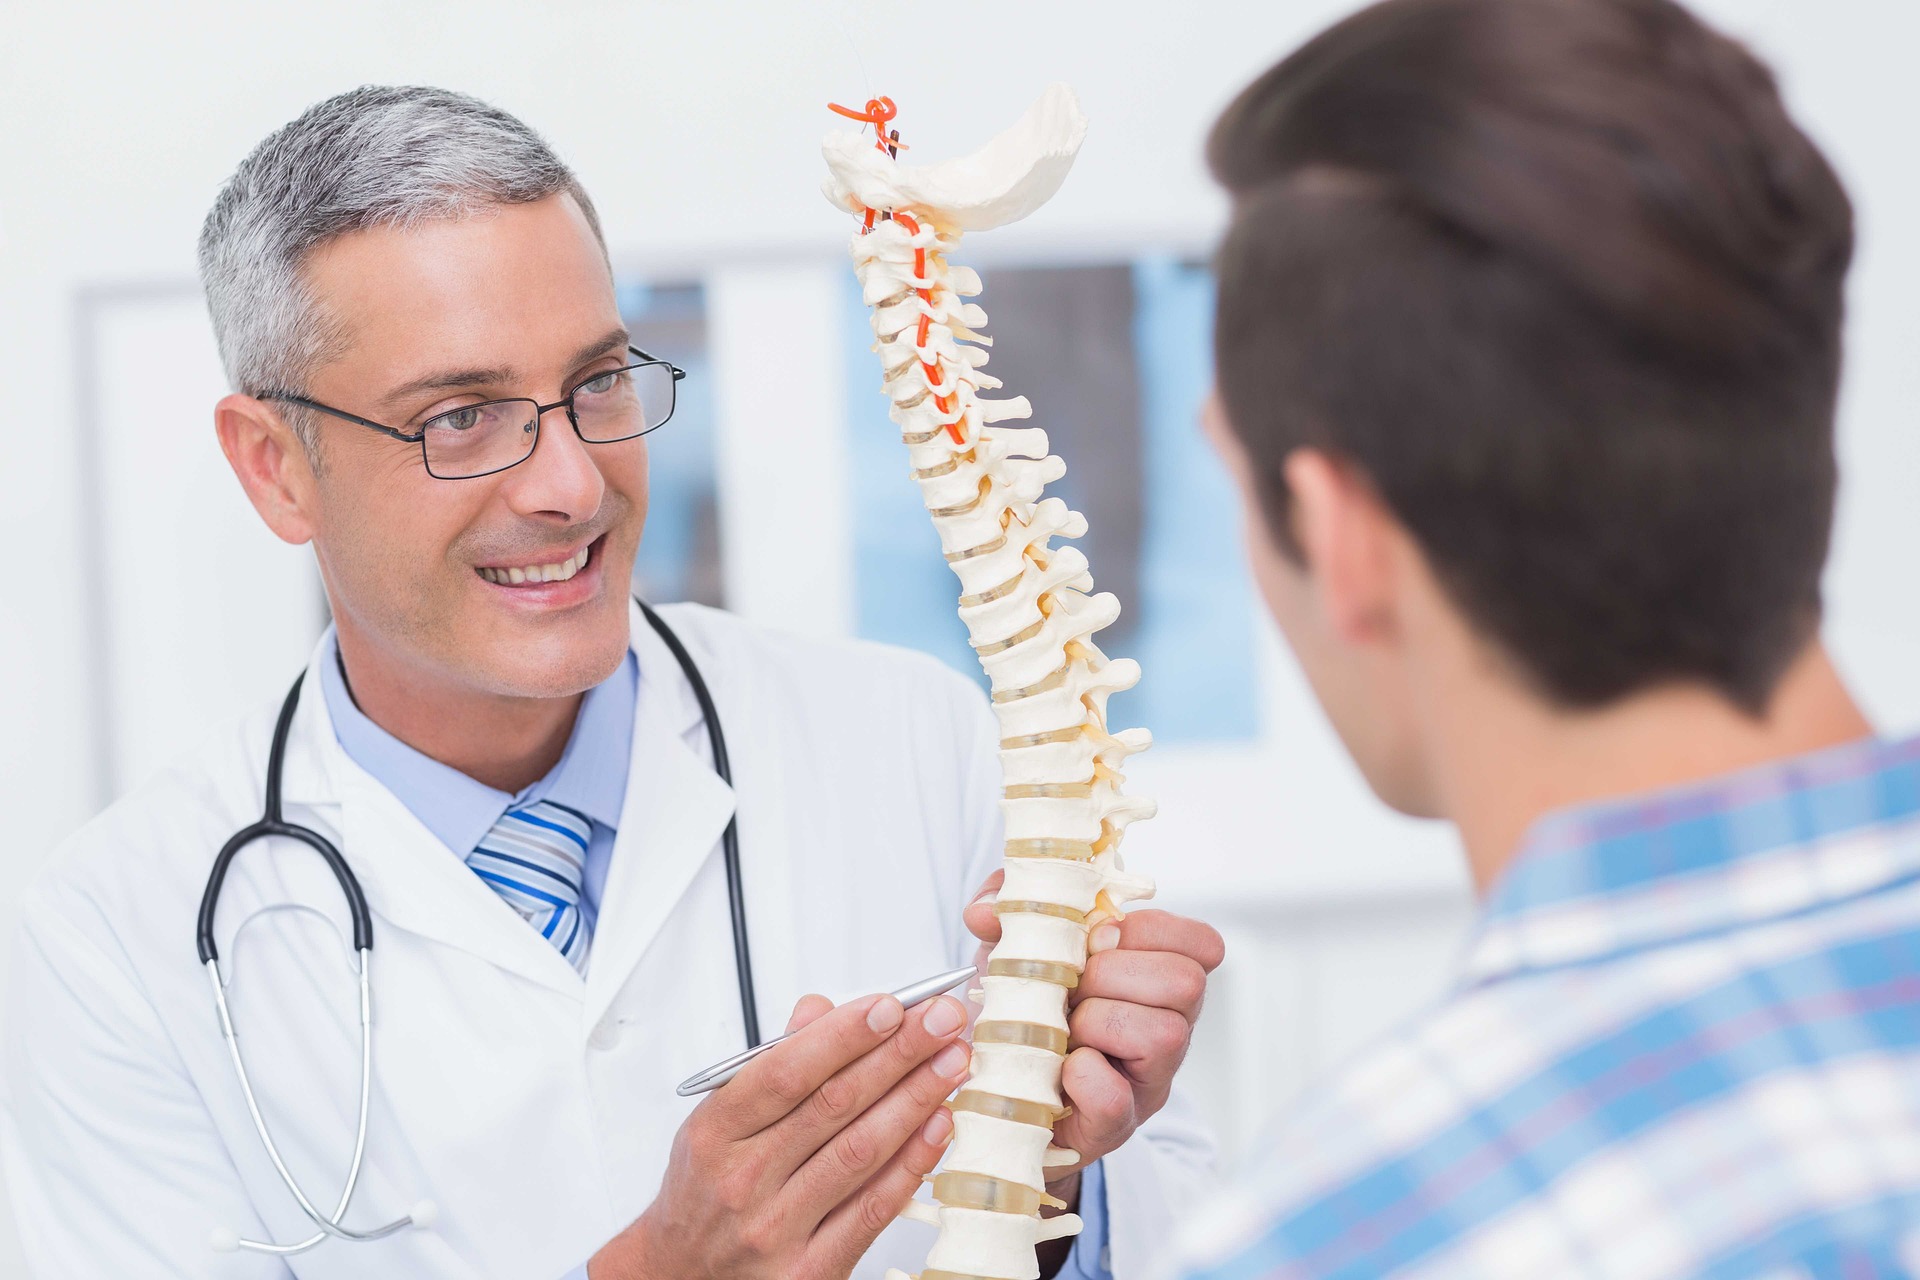 Doctor holding a plastic spine educates a patient on how chiropractic adjustments allow the nervous system to communicate better